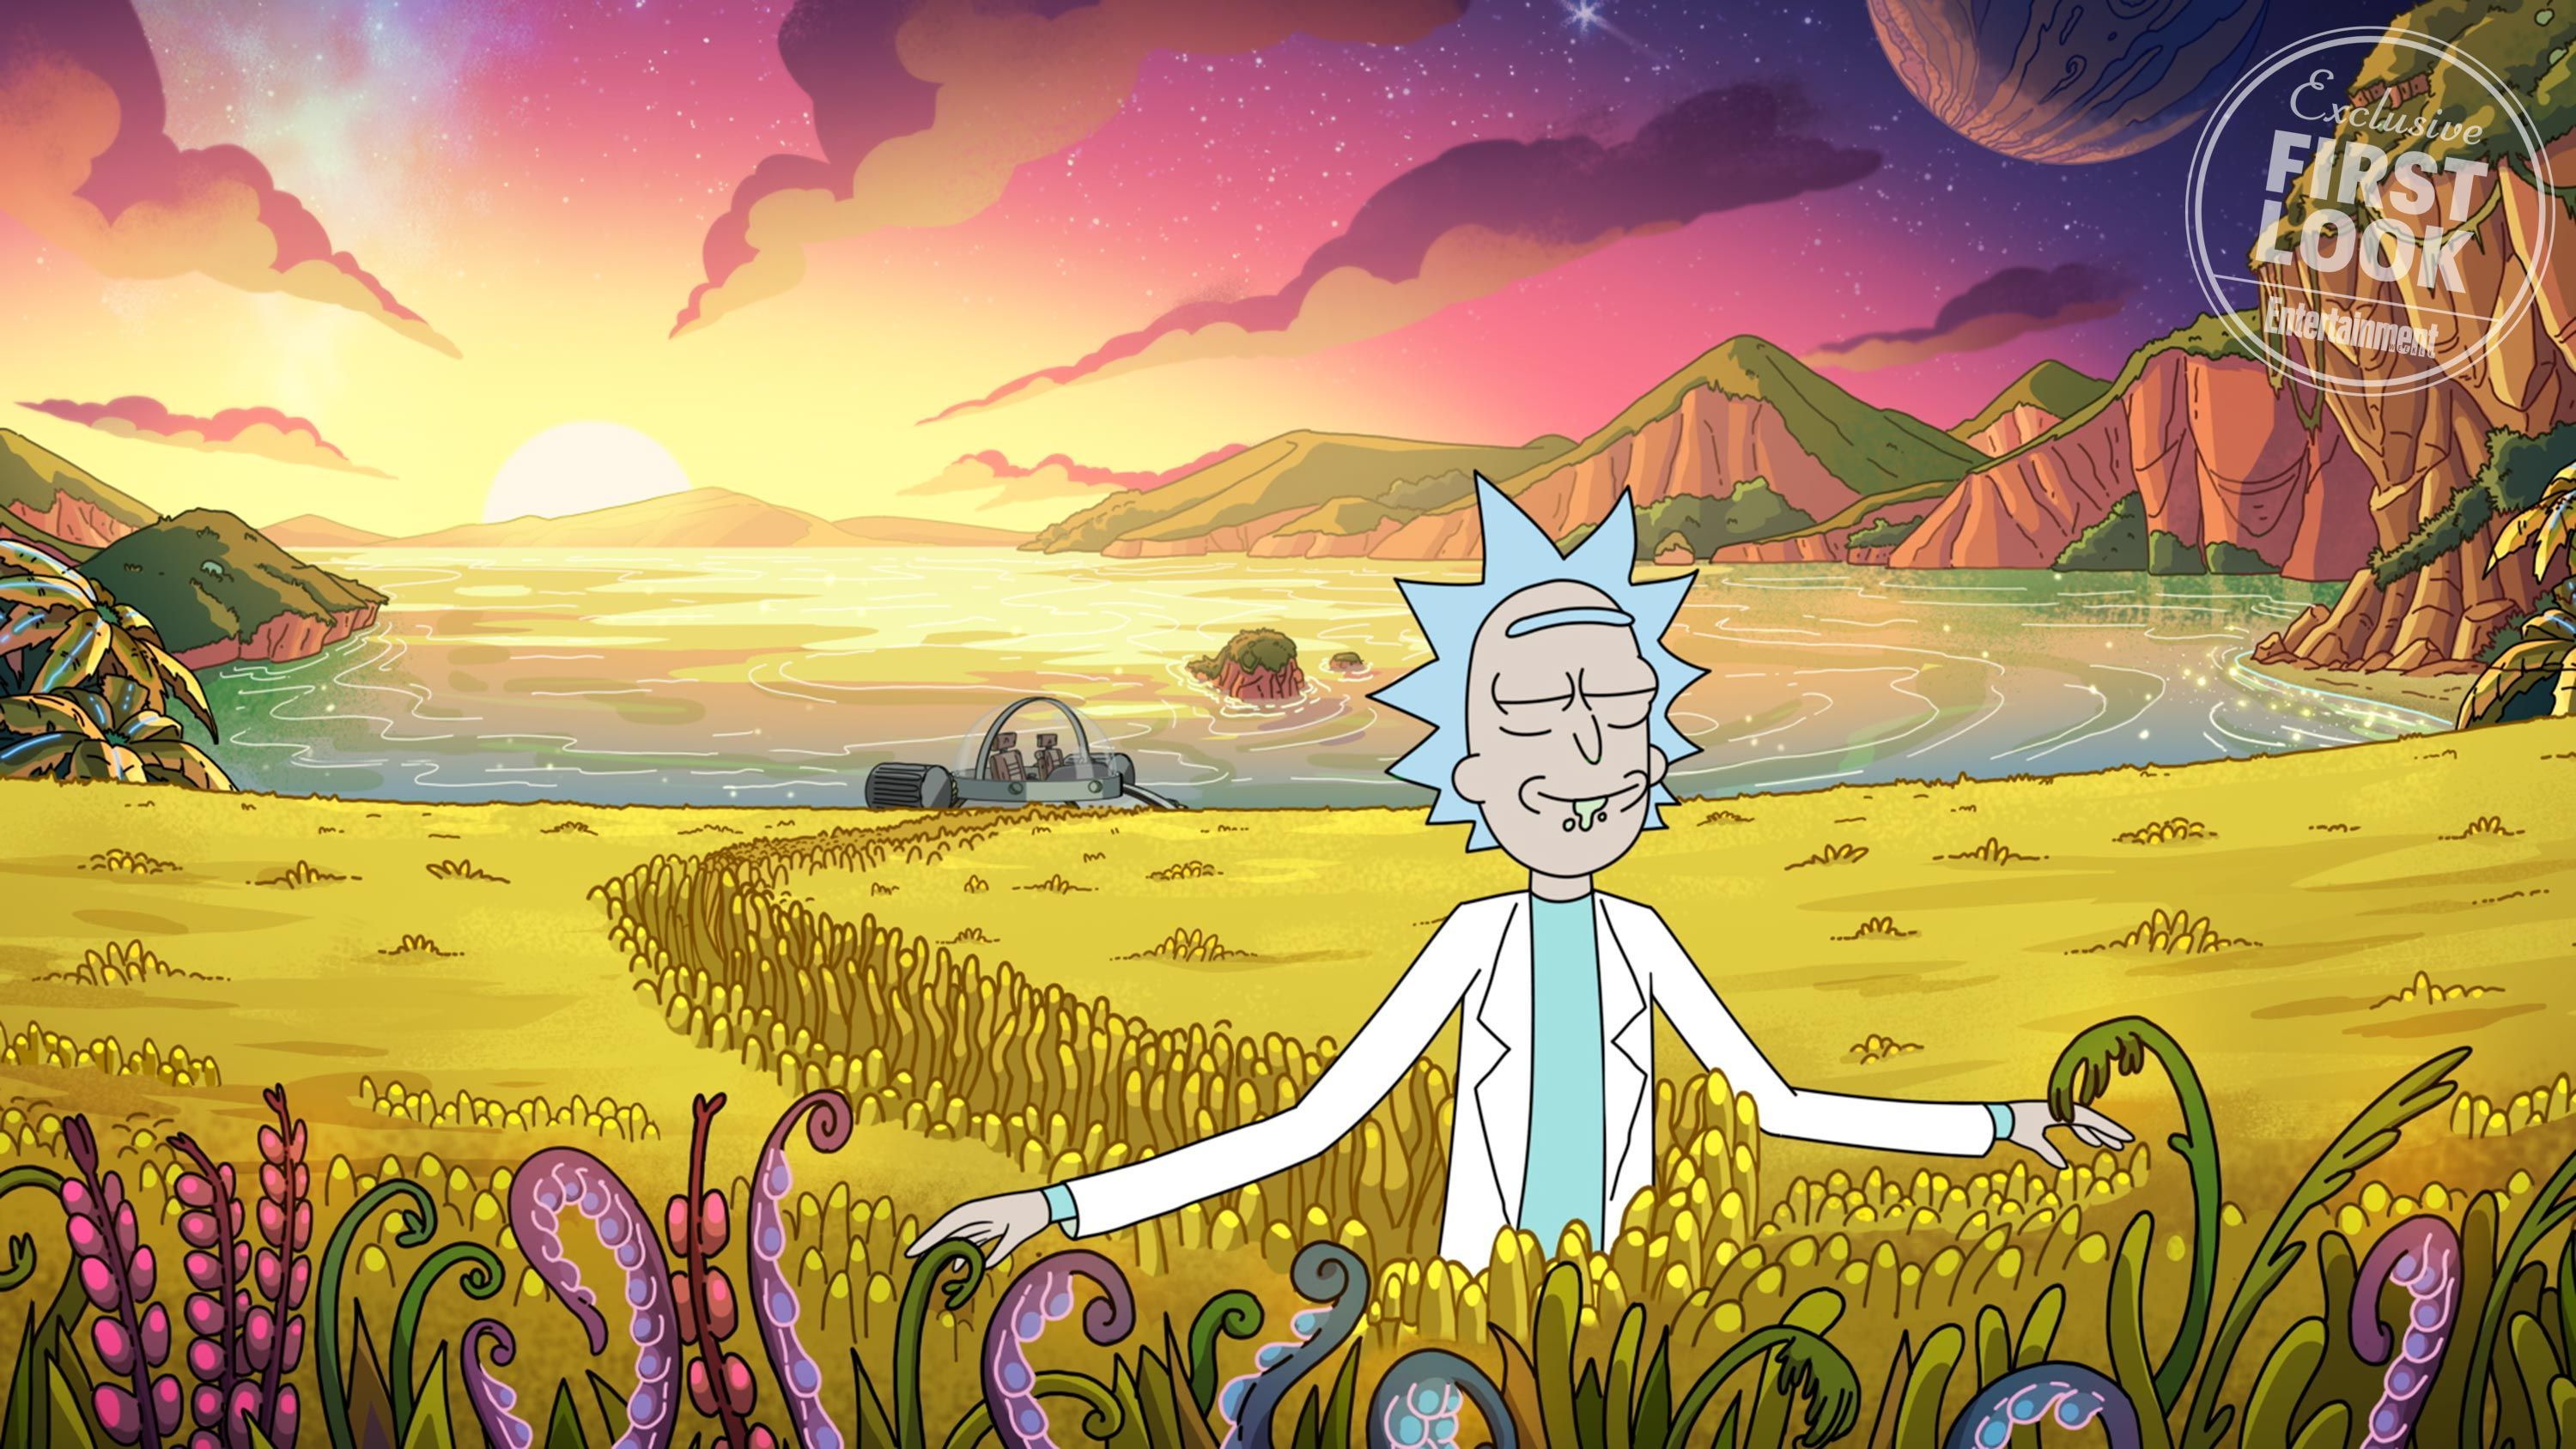 Rick and Morty' first photos from season 4 revealed.